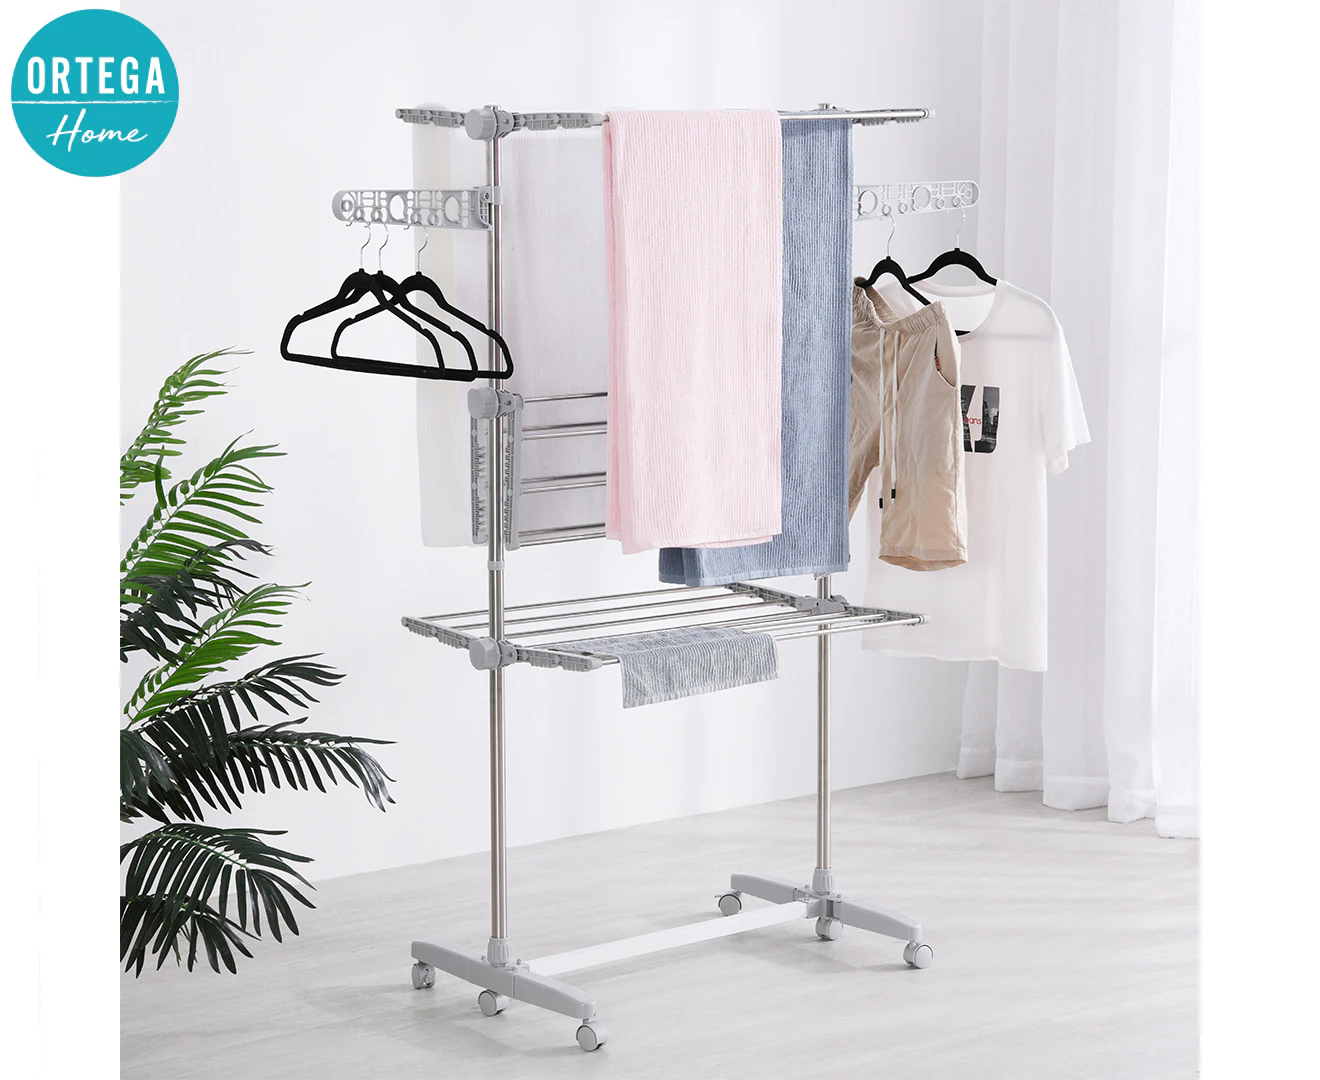 Shop Electric Clothes Drying Rack - Catch